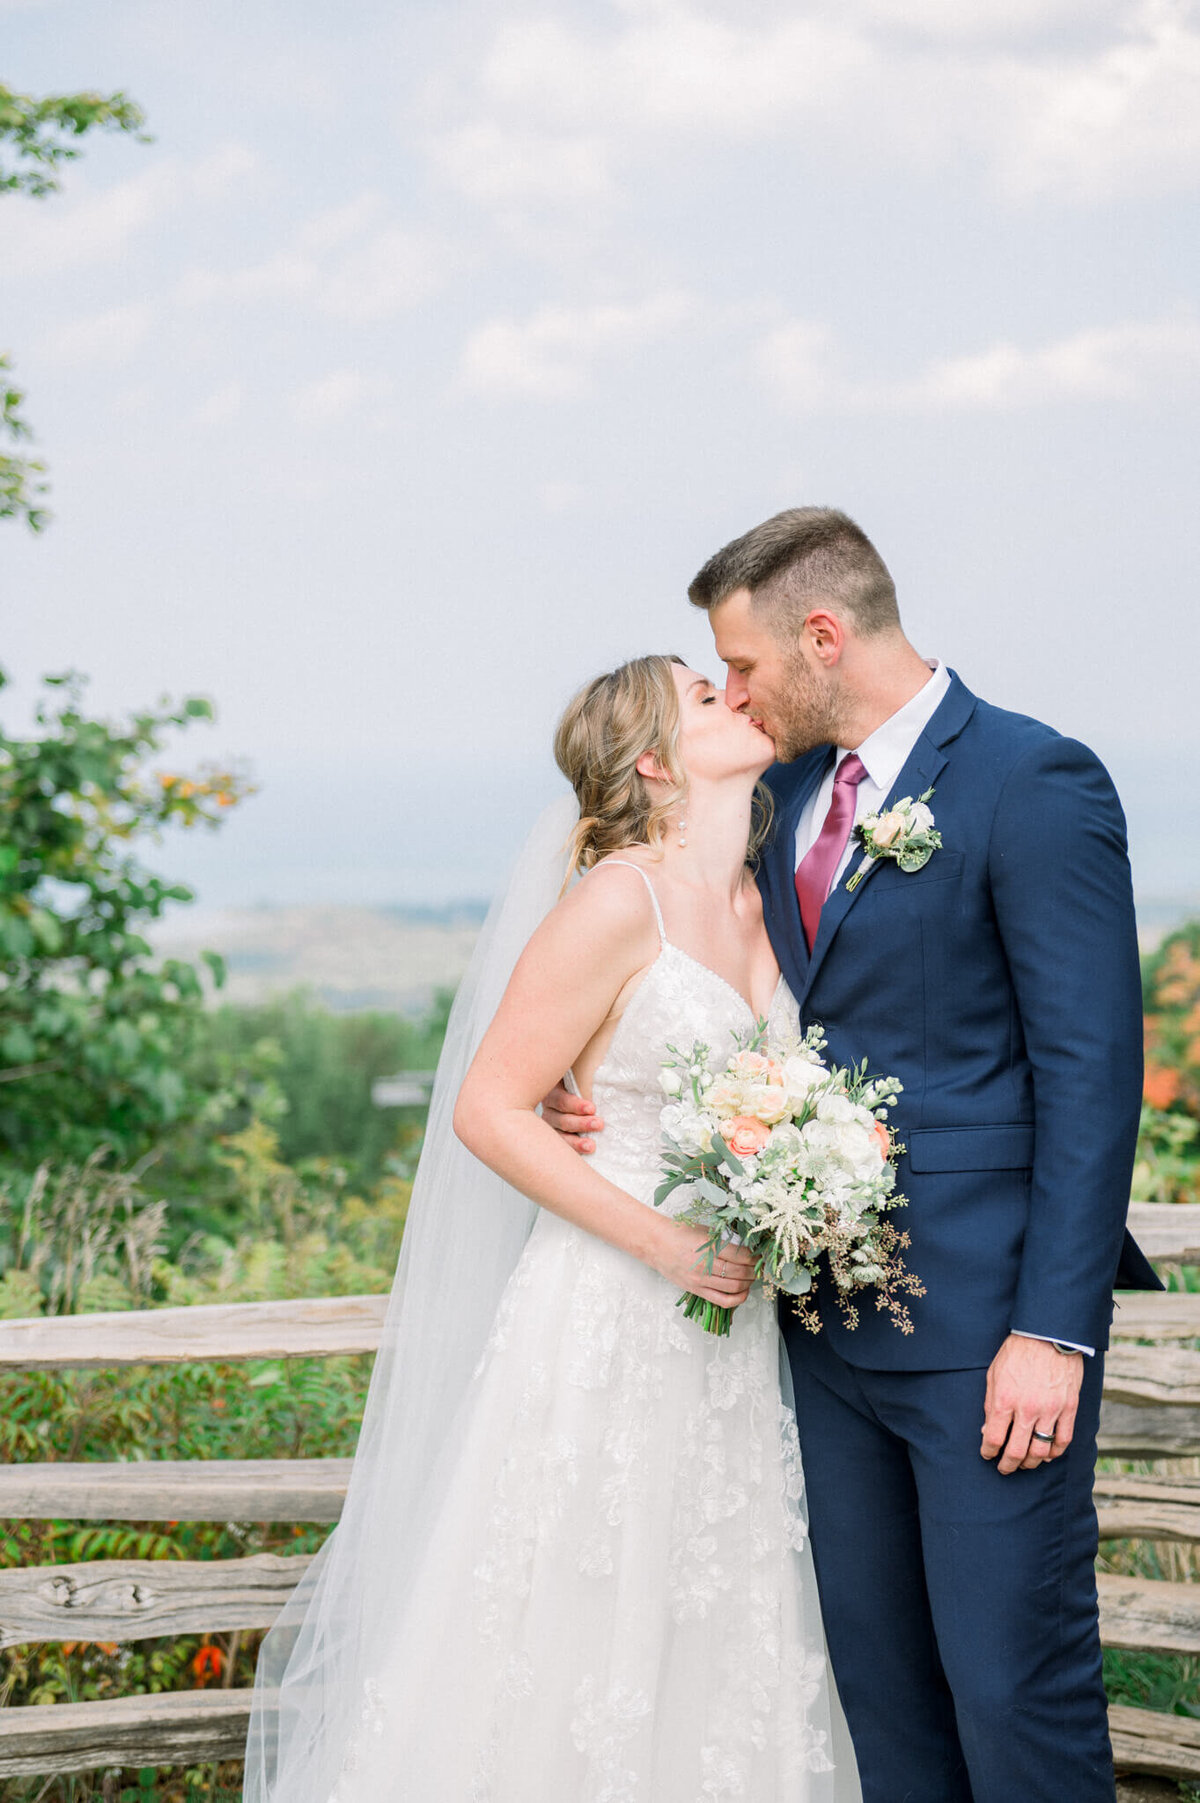 Bride and groom kissing in Blue Mountain for their wedding portrait captured by Niagara wedding photographer